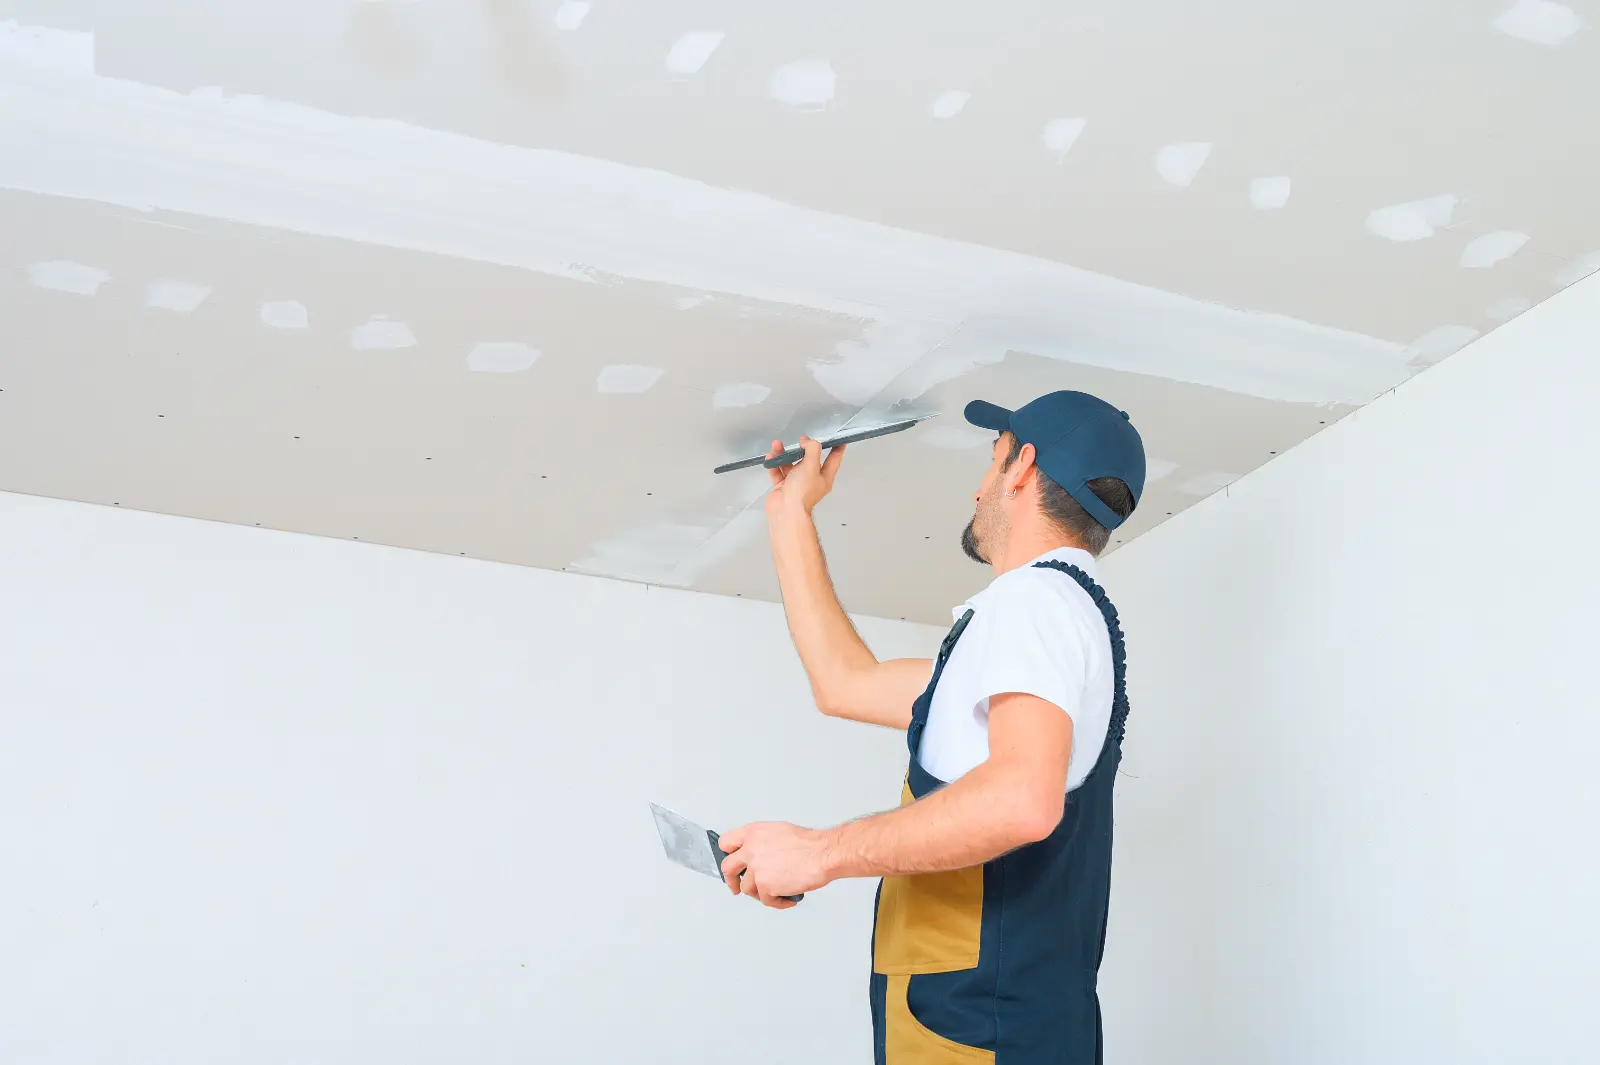 Drywall Installation. A uniformed worker applies putty to the drywall ceiling. Putty of joints of drywall sheets